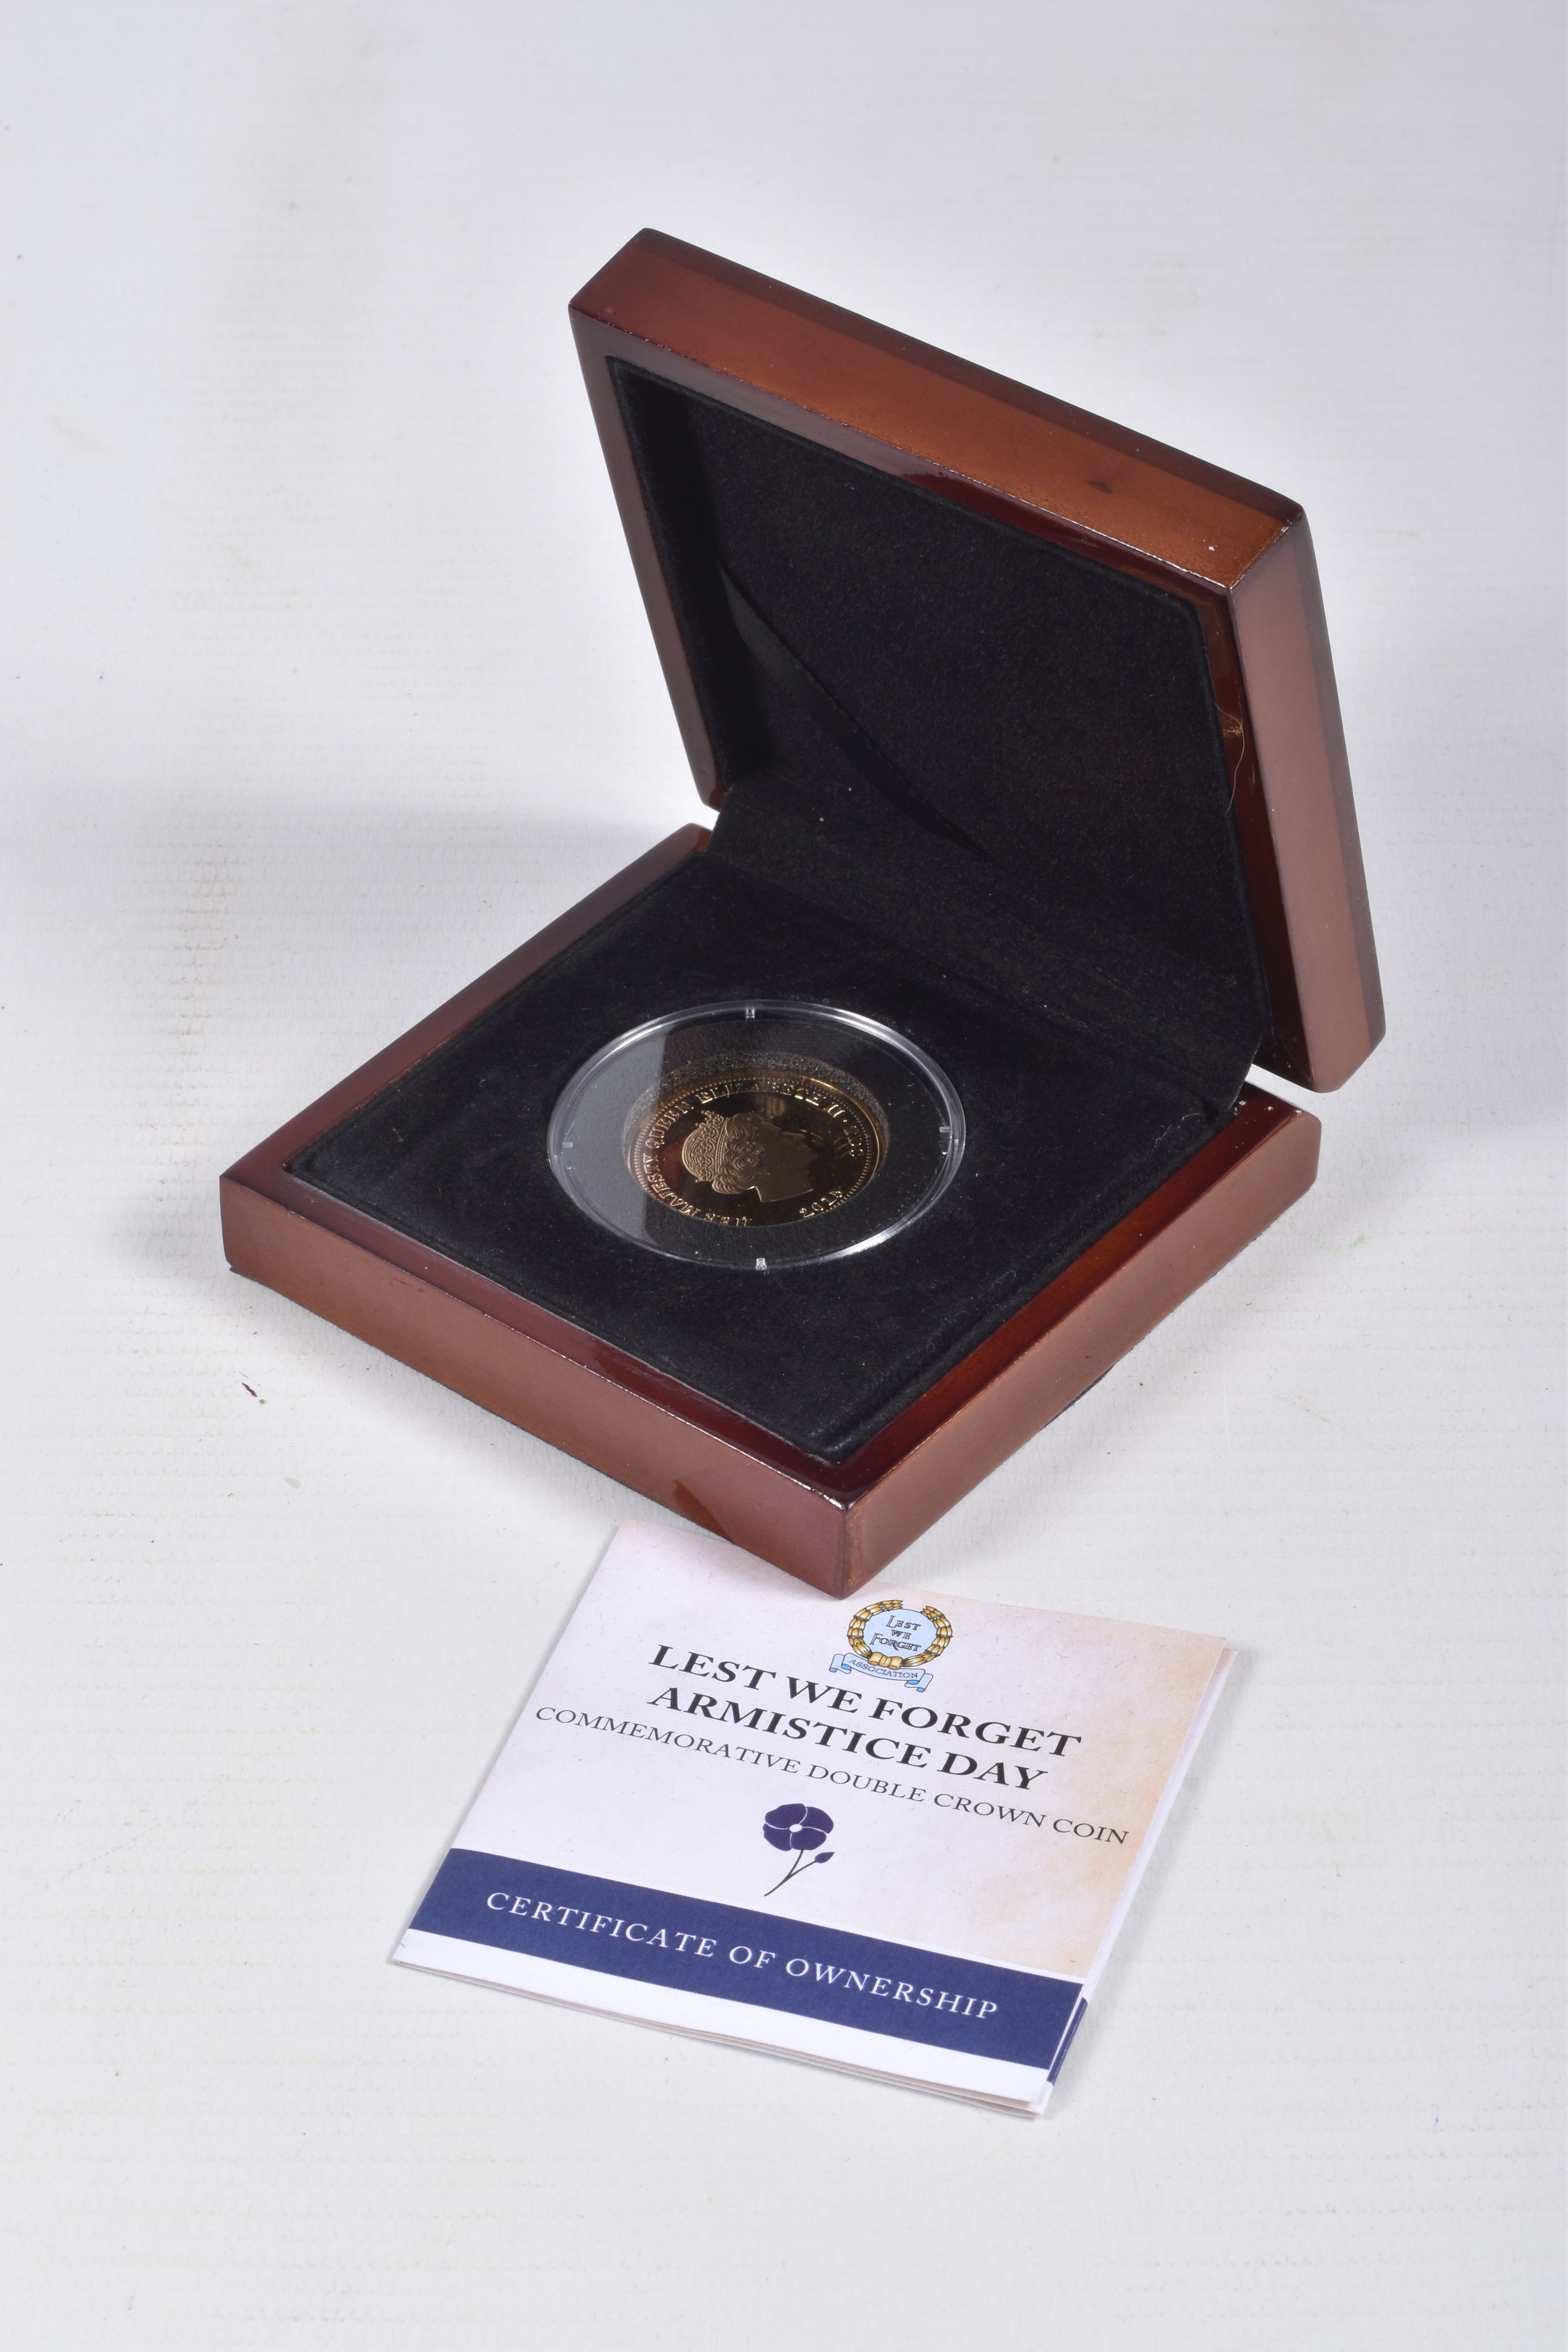 A 9CT COMMEMORATIVE DOUBLE CROWN PROOF COIN, commemorating Armistice day, dated 2015, stated